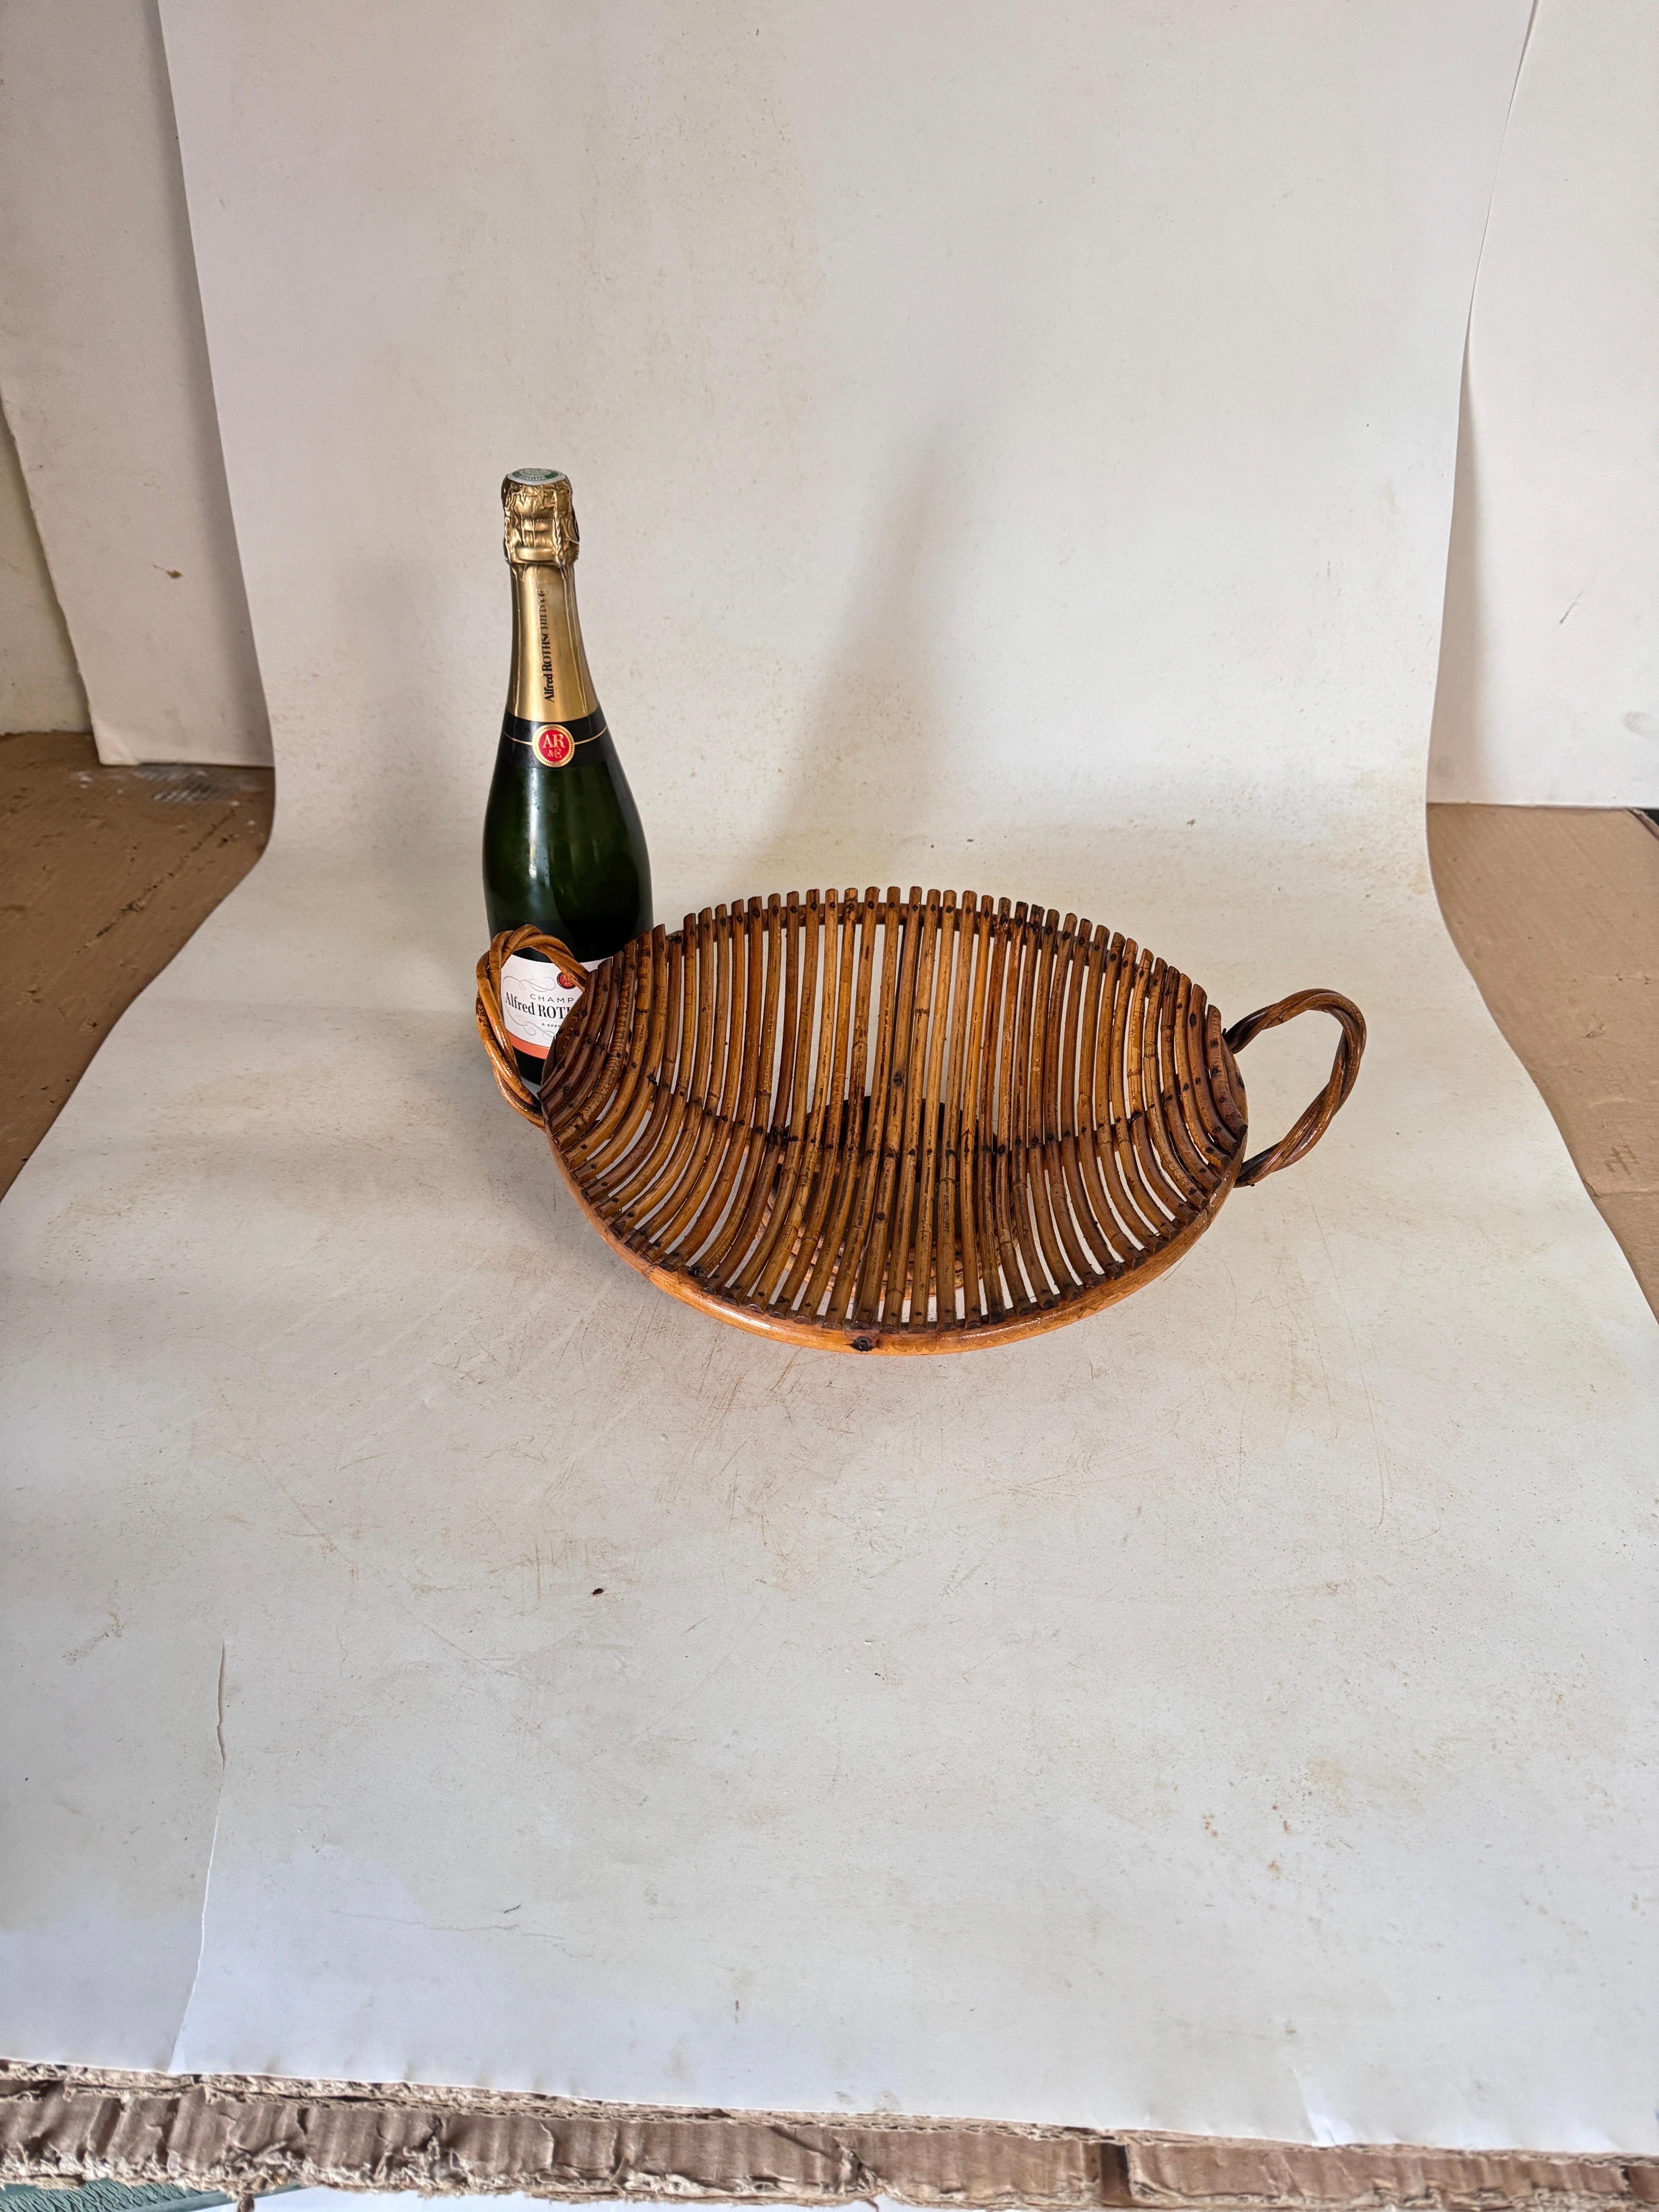 Mid-Century Modern brass  / rattan large bowl, centerpiece or basket.

Handcrafted in Italy, 1970s. 
Use it as fruit bowl or centerpiece to add a stylish Midcentury accent in a kitchen. Perfect to storage or display whatever you want.
